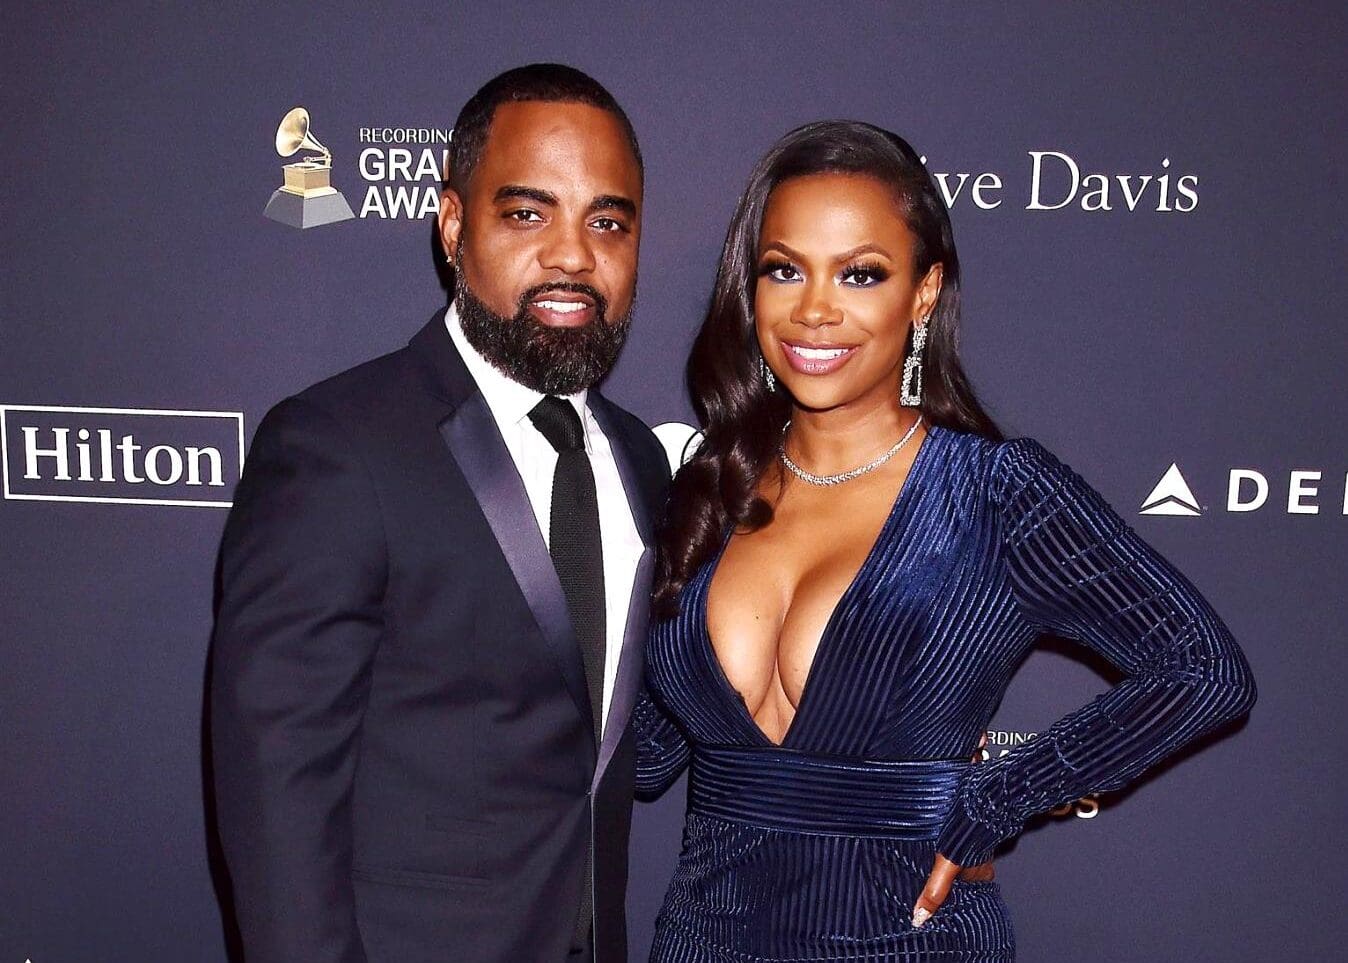 Kandi Burruss And Todd Tucker Have A Surprise For Fans - Check Out Their Date Night Tomorrow